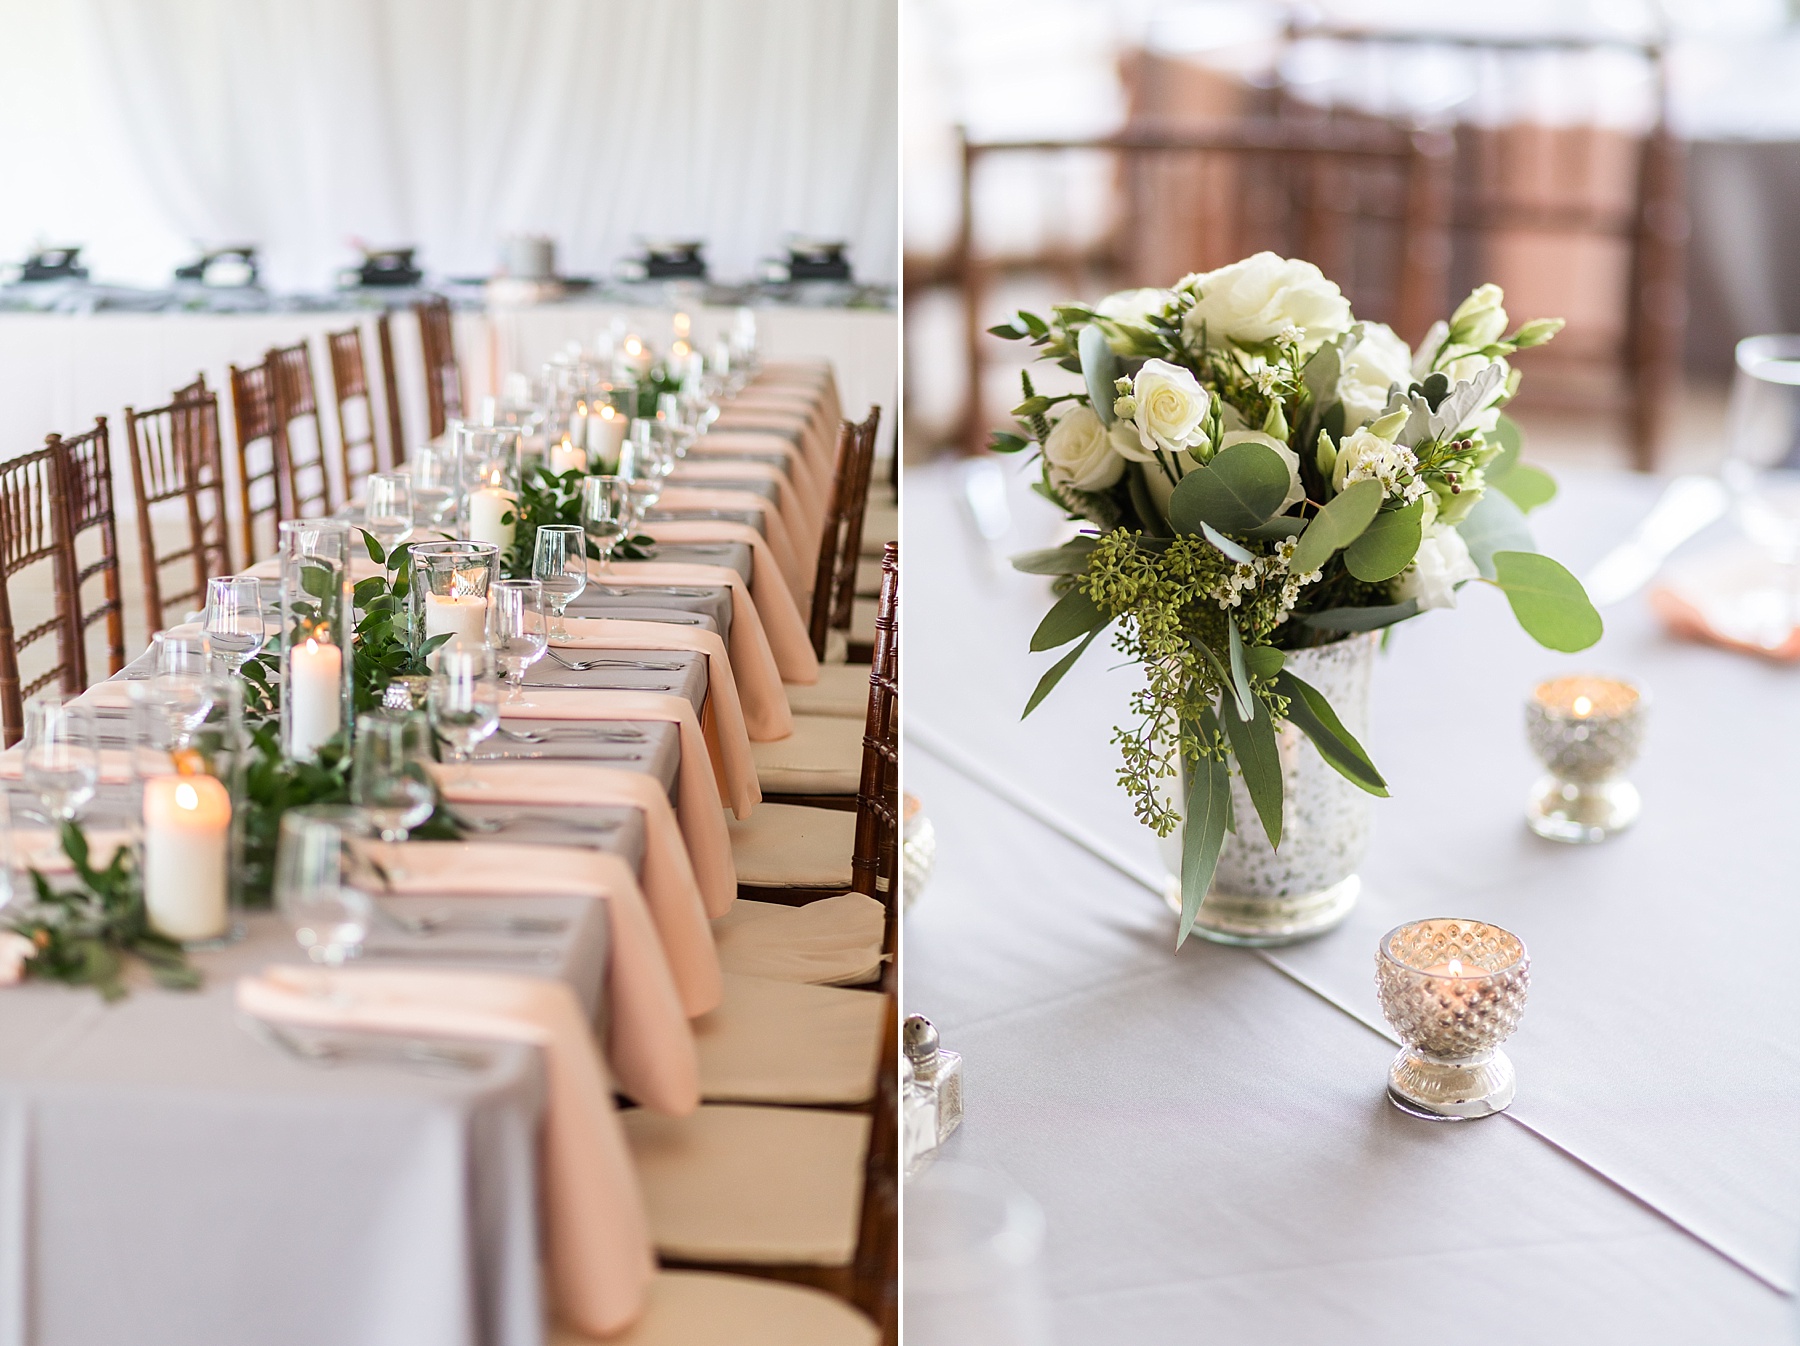 Alexandra Mandato Photography photographs table with florals by Bend in the River Farm